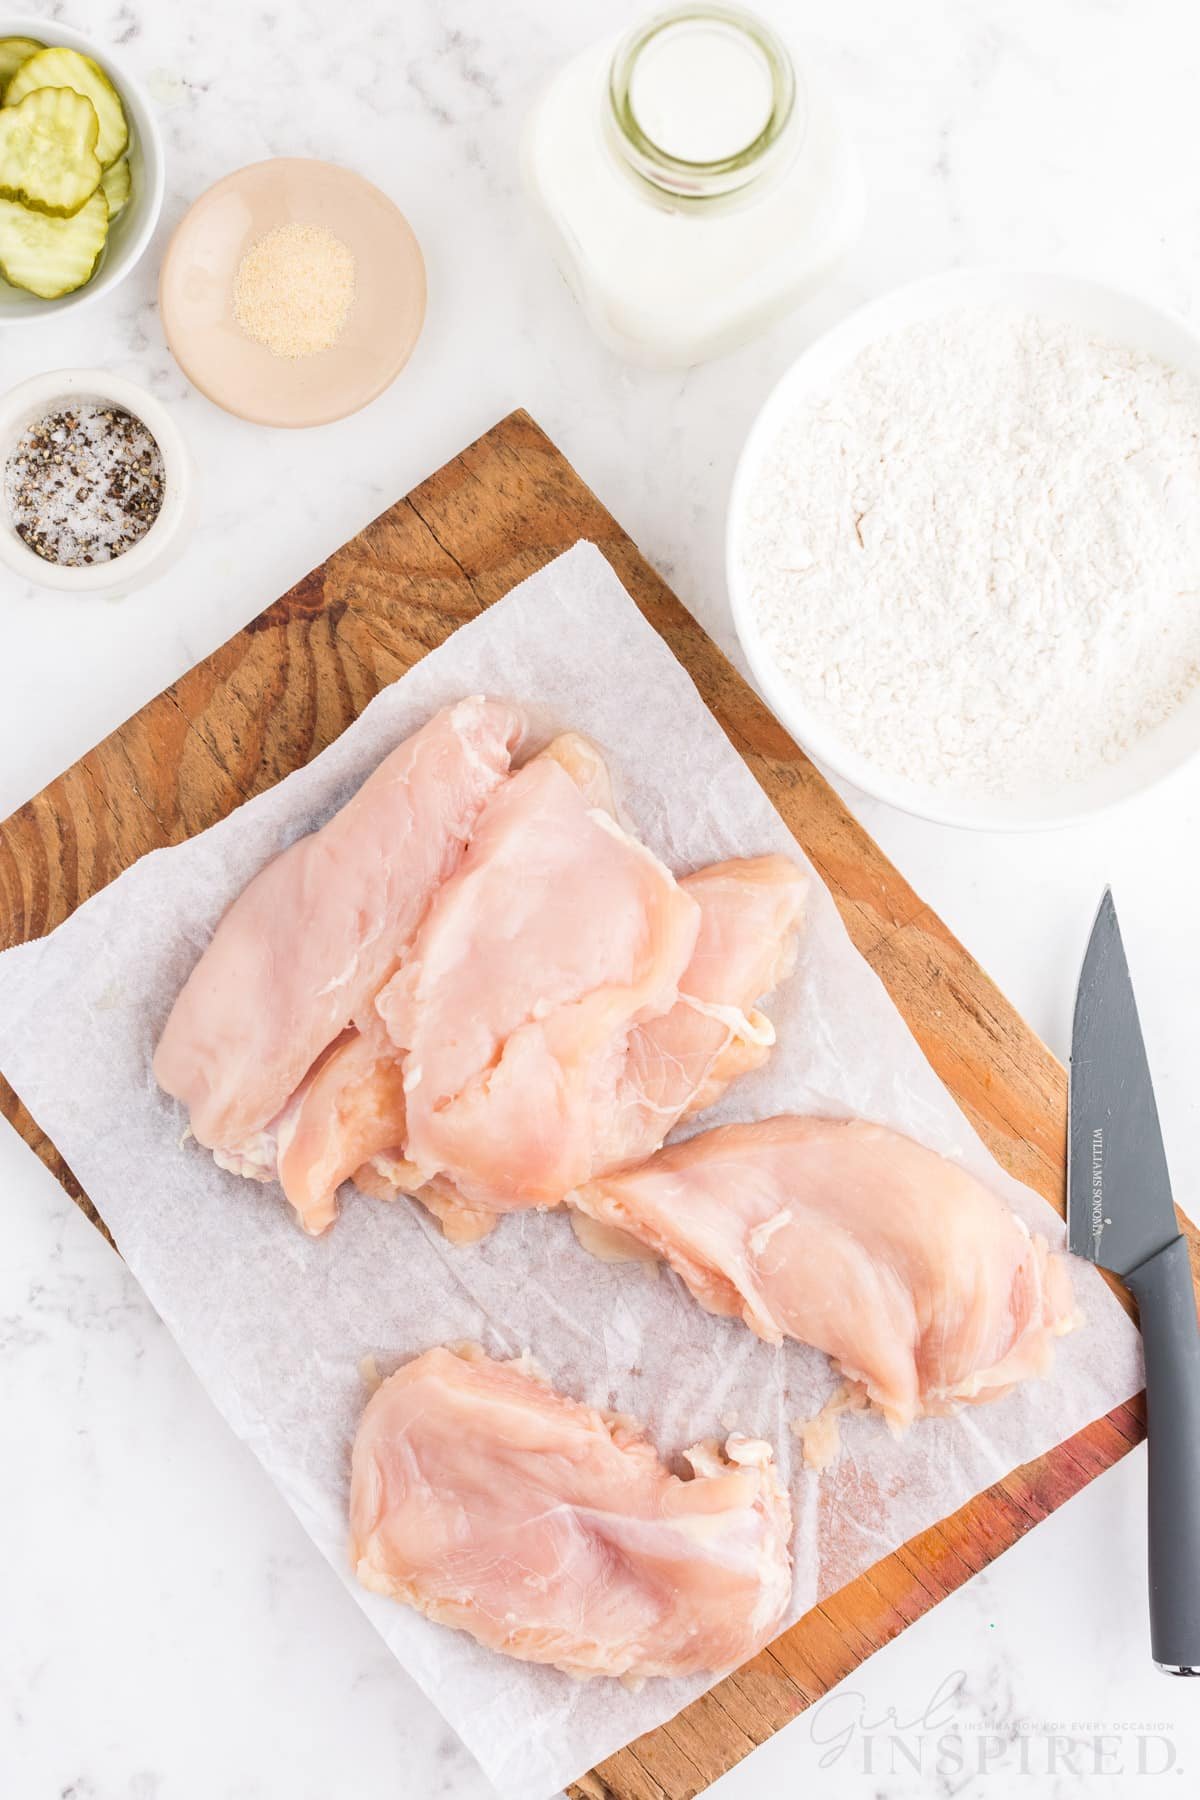 Several chicken breasts on wooden kitchen board lined with parchment paper, knife, bowl of flour, bowl of oil, bowl of sliced dill pickles, bowl of seasoning, bottle of buttermilk, on a white marble surface.